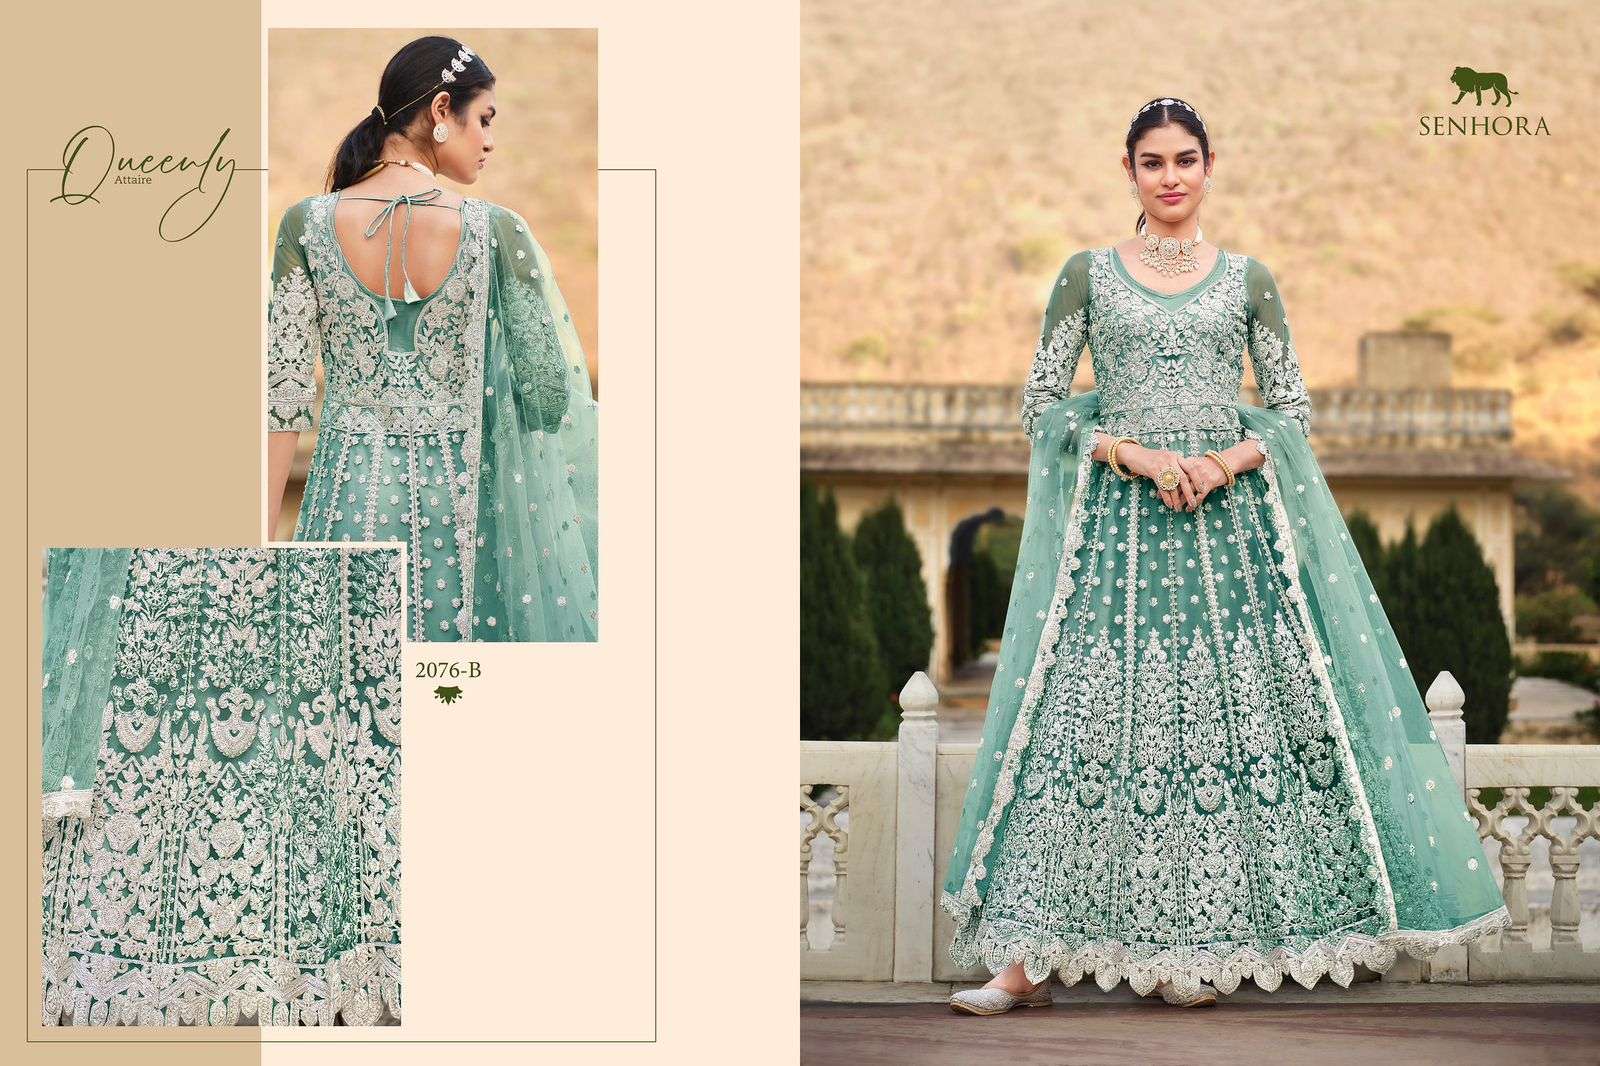 Anokhi By Senhora Dresses 2076-A To 2076-C Series Beautiful Anarkali Suits Colorful Stylish Fancy Casual Wear & Ethnic Wear Pure Net Dresses At Wholesale Price